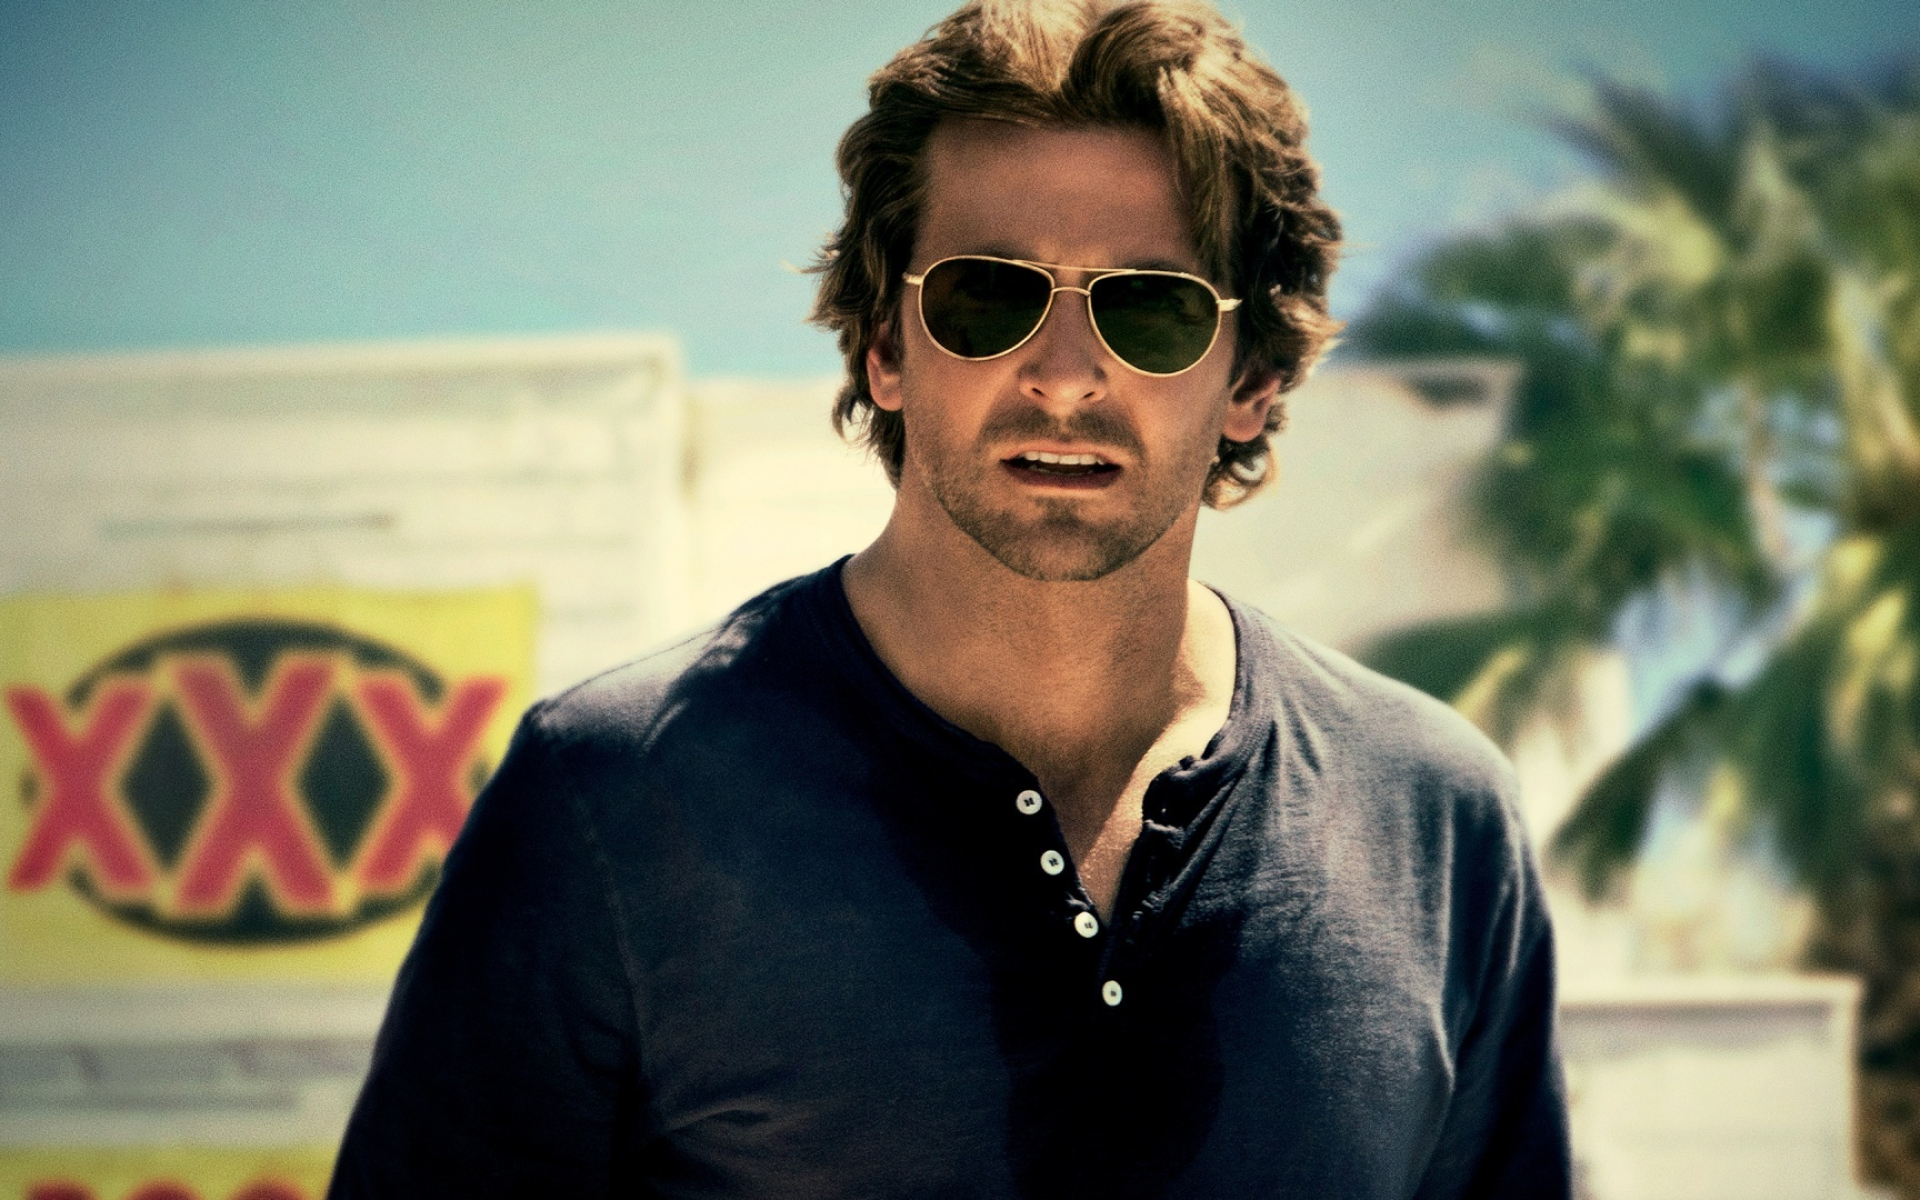 The Hangover: Bradley Cooper, The recipient of various accolades, including a British Academy Film Award and two Grammy Awards. 1920x1200 HD Wallpaper.